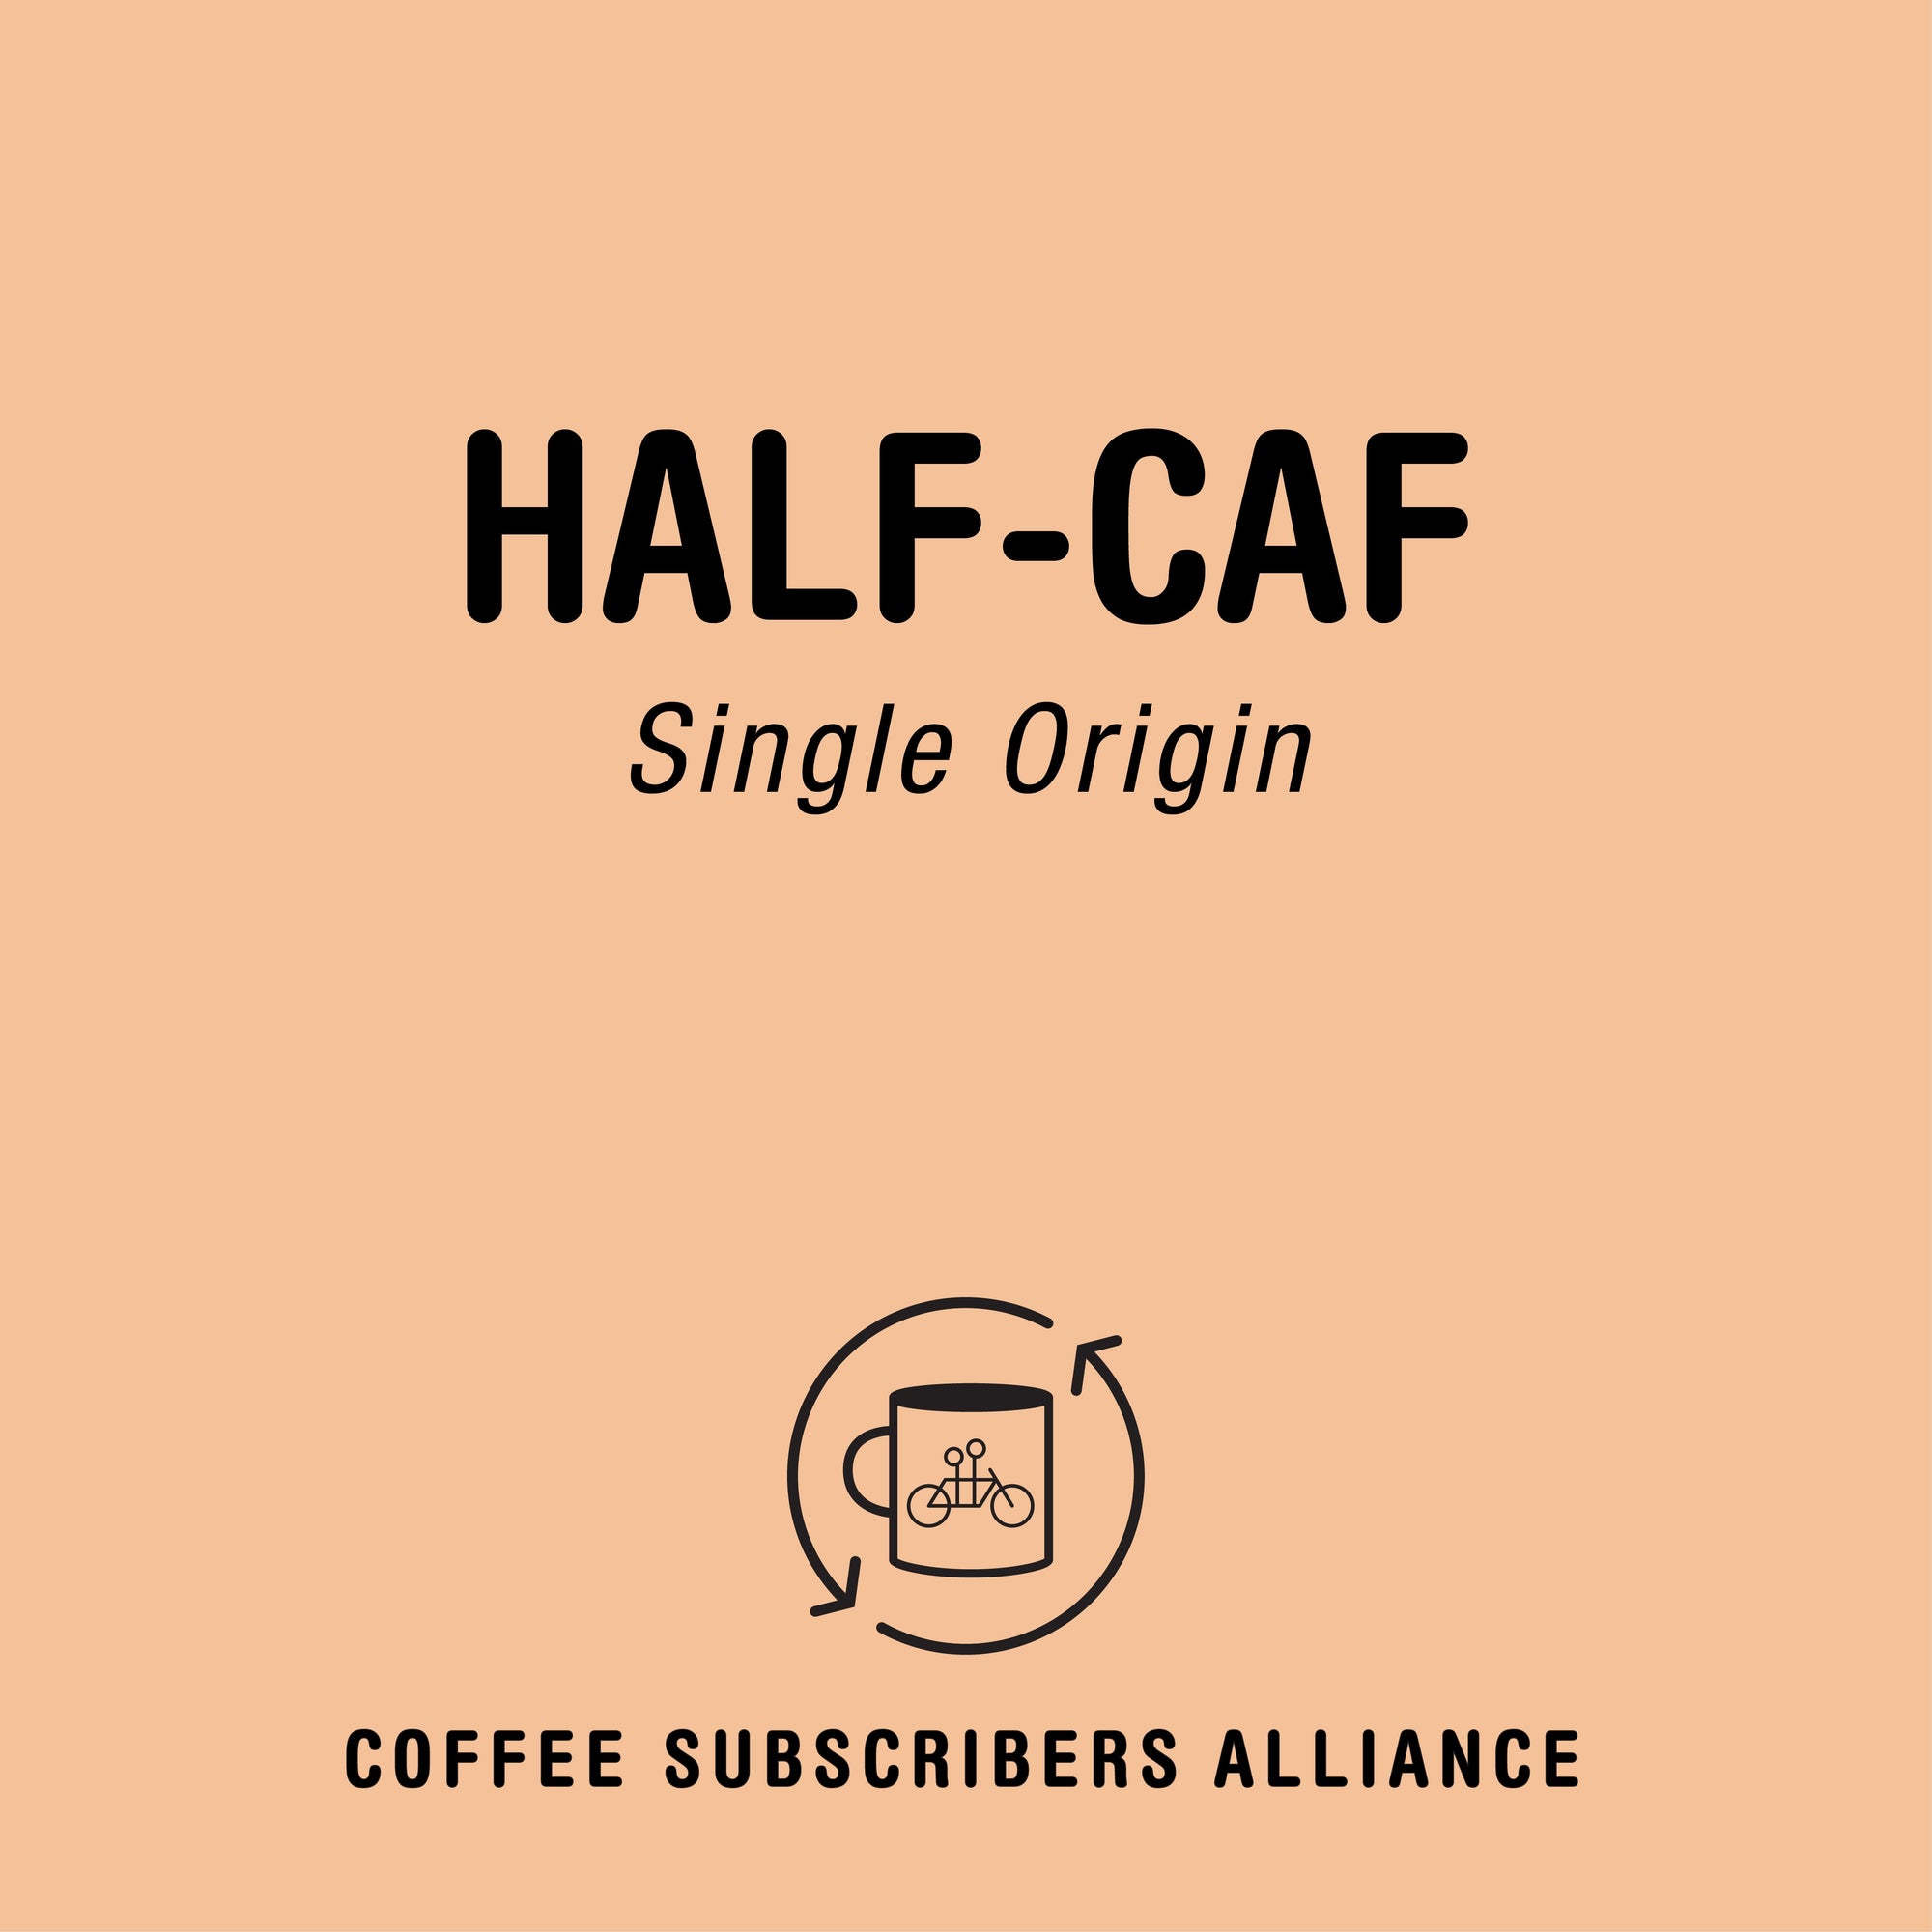 A minimalist coffee advertisement with a beige background, featuring the Half-Caf Subscription Gift 1 Week x 3 from Tandem in bold black text. Below is a circular logo with a coffee cup and the text "coffee subscription".